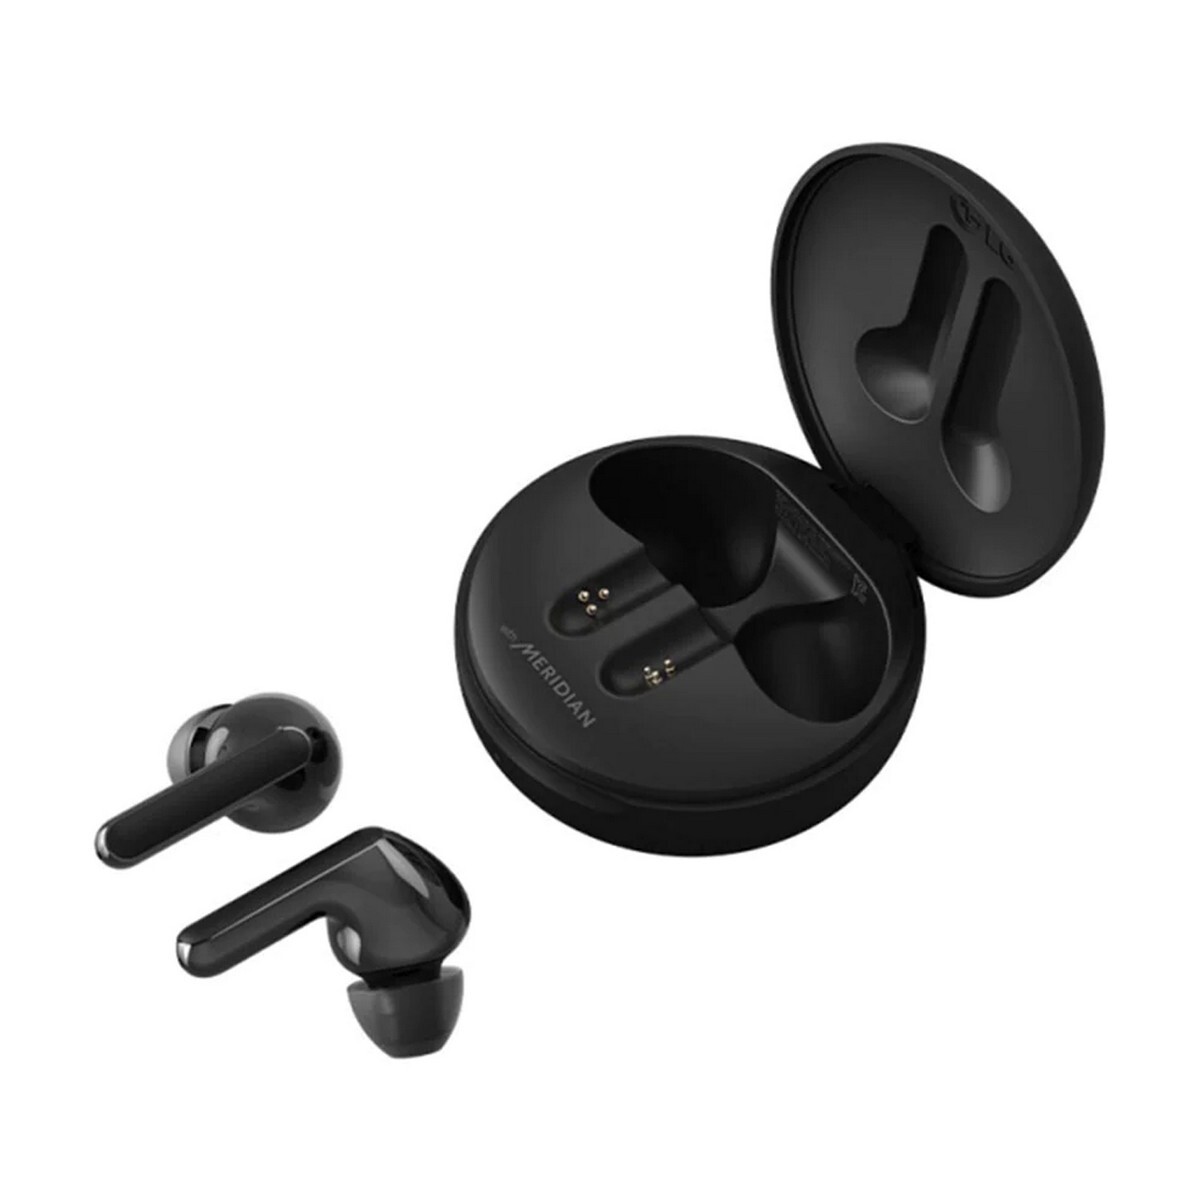 LG FN5U Tone Free Wireless Earbuds with Noise Isolation Black